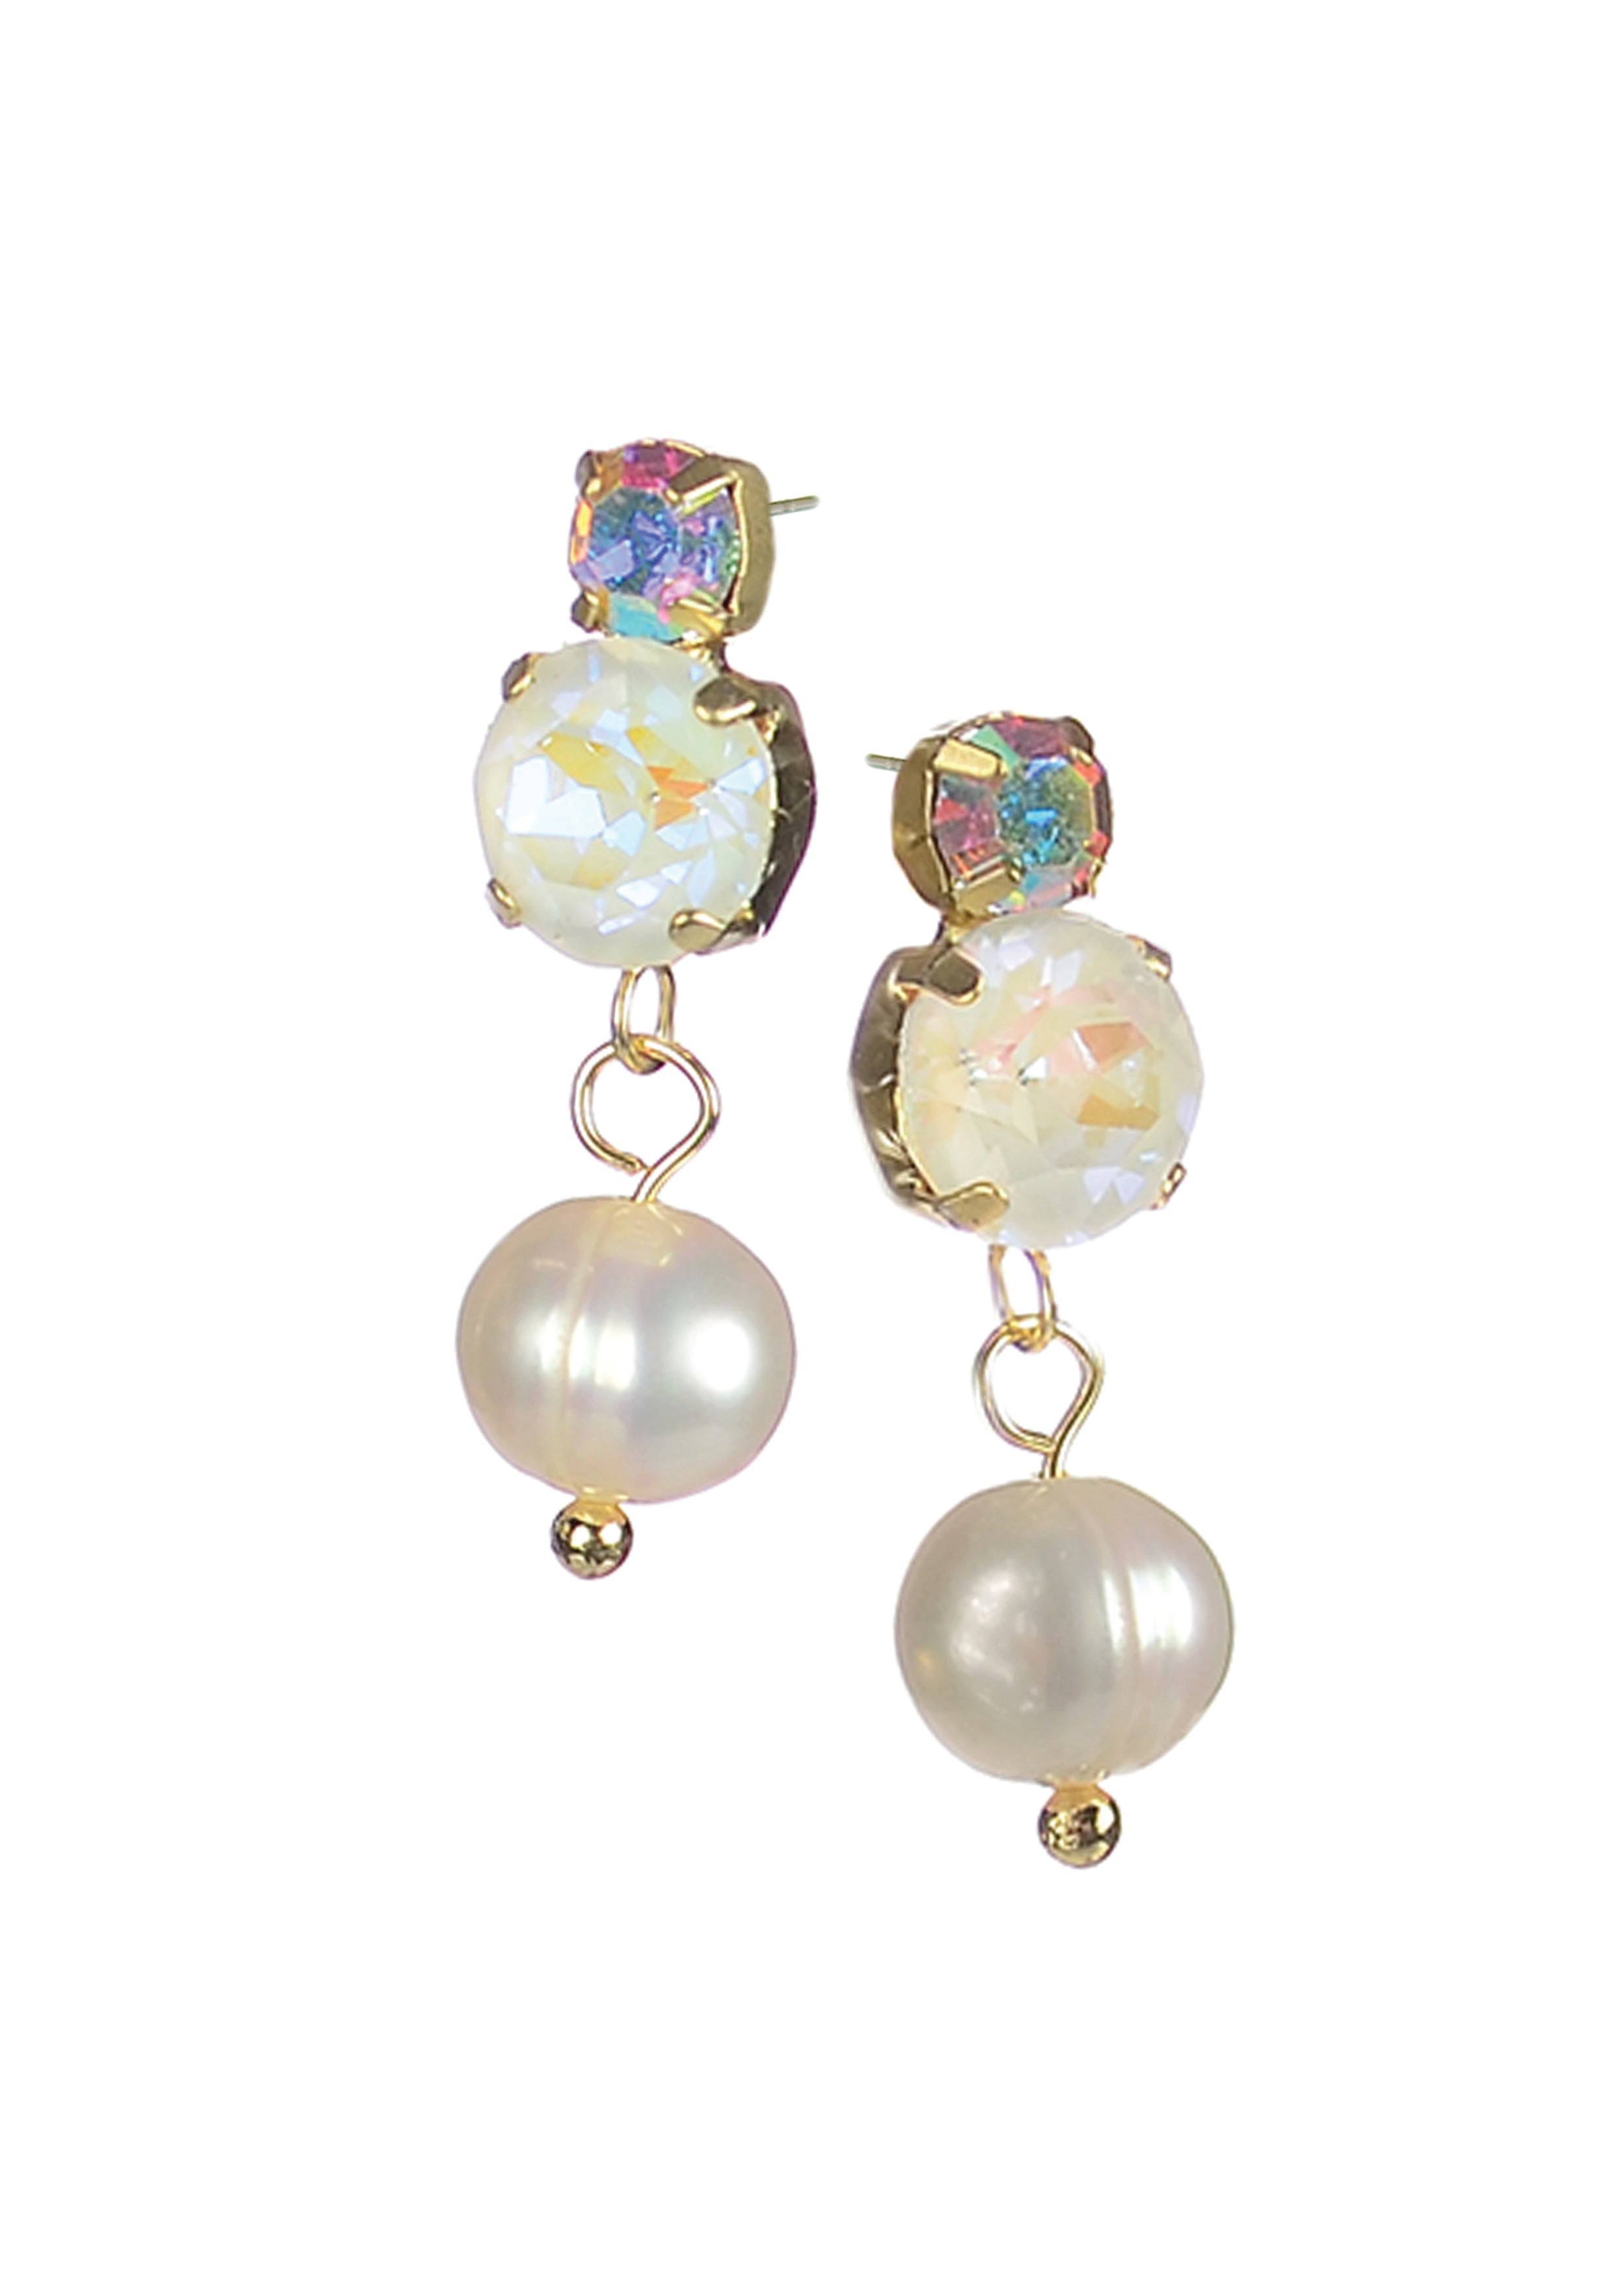 Pearl May Drops - The Nancy Smillie Shop - Art, Jewellery & Designer Gifts Glasgow